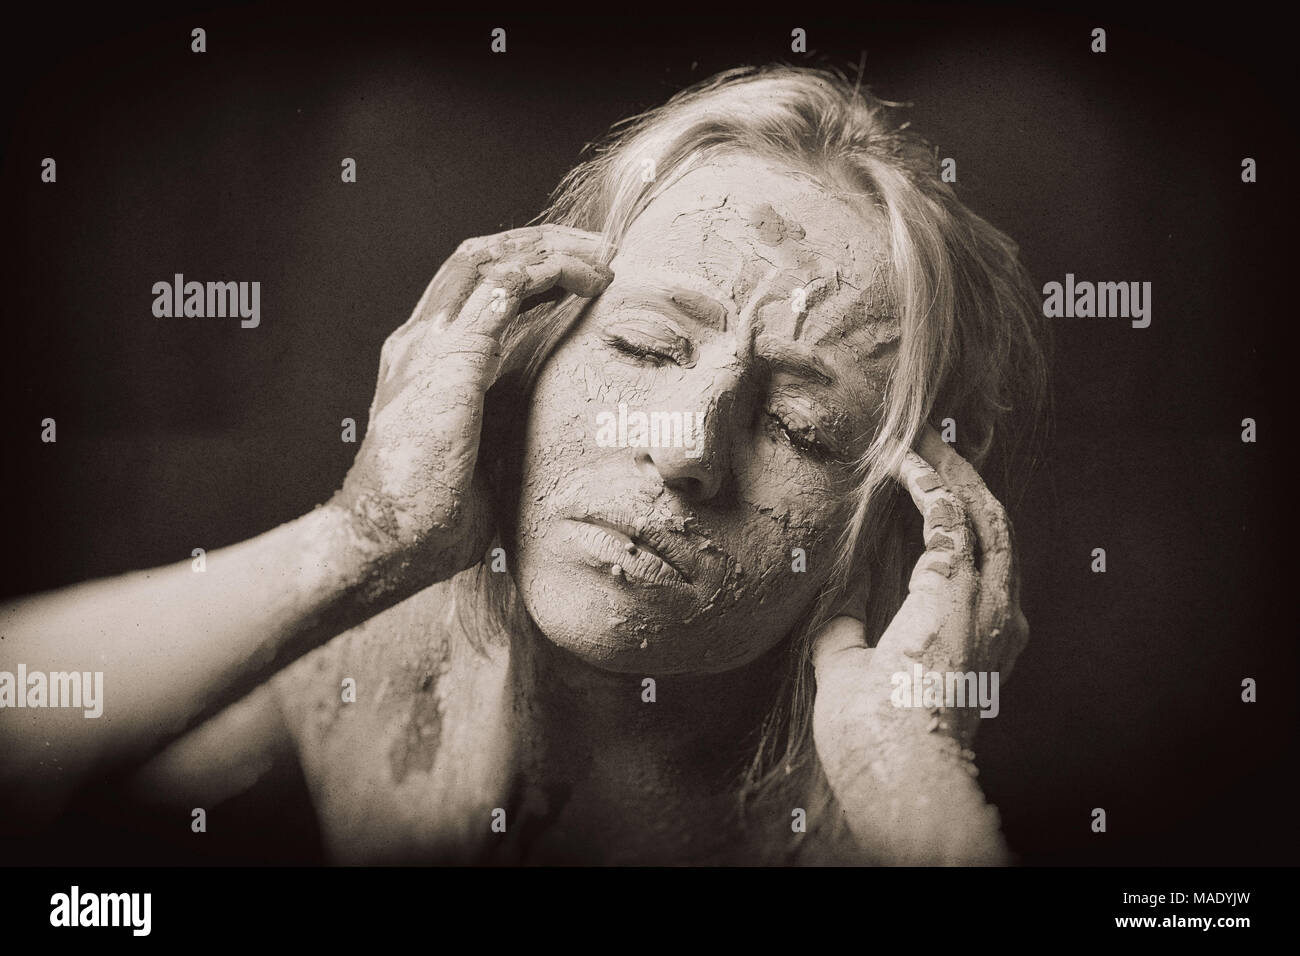 woman covered in dry cracked clay mask holding her head Stock Photo